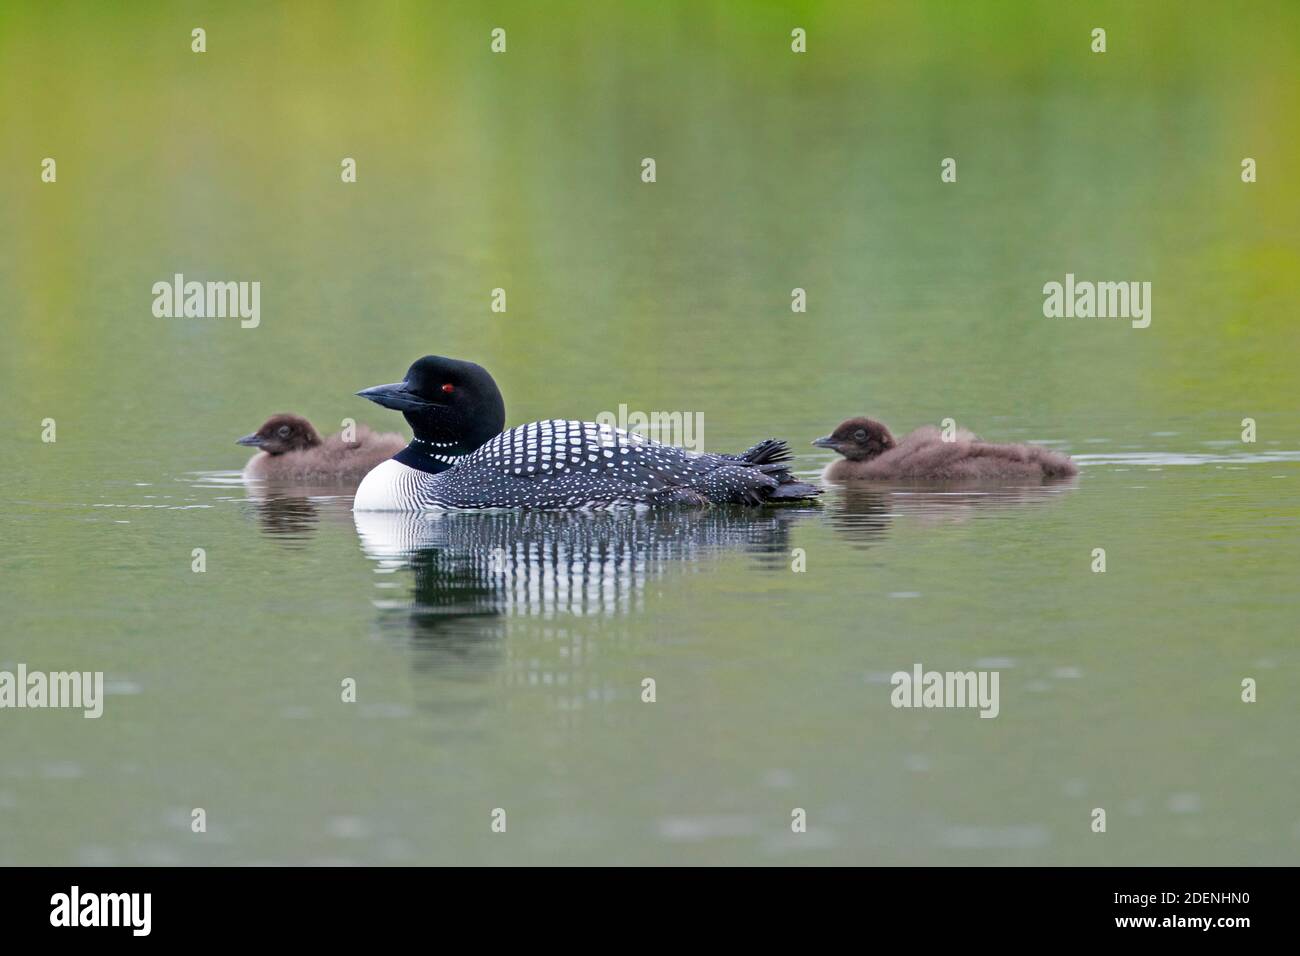 Common loon / great northern diver (Gavia immer) parent in breeding plumage swimming with two chicks in lake in summer Stock Photo